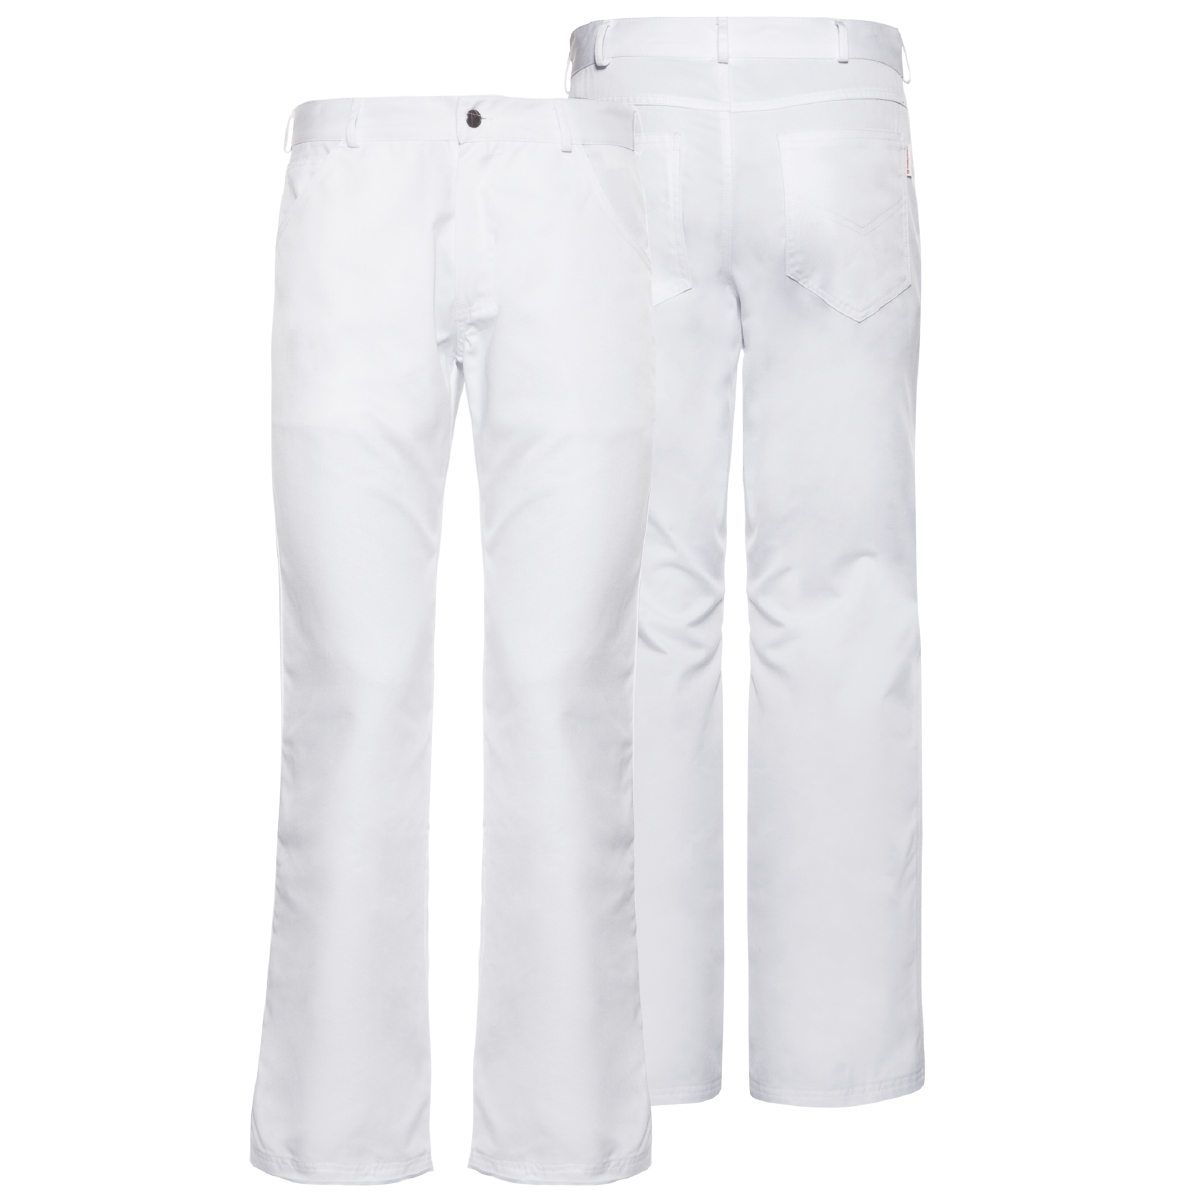 Karlowsky PASSION Herrenhose Manolo weiss